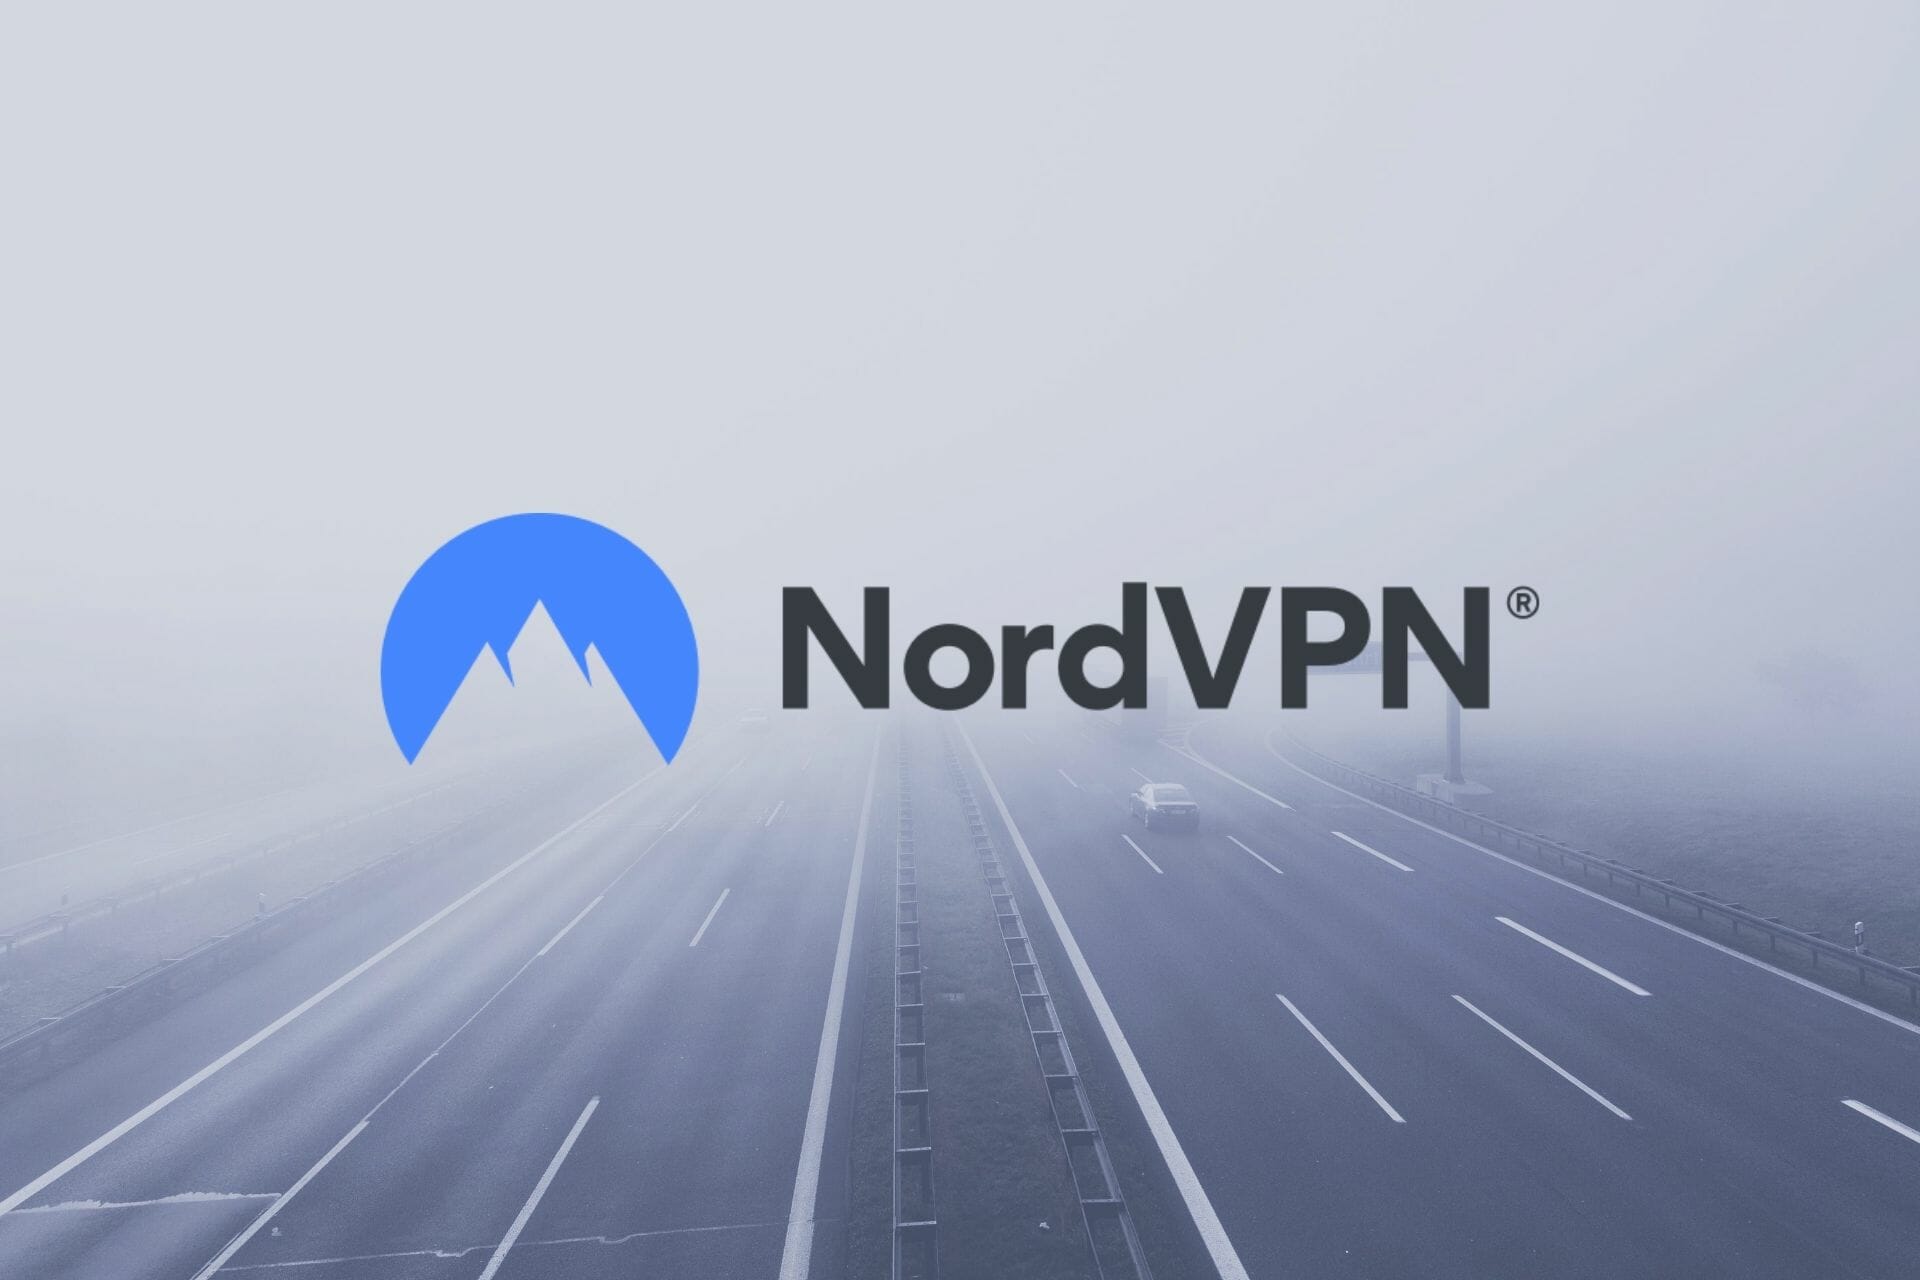 Can NordVPN be trusted?